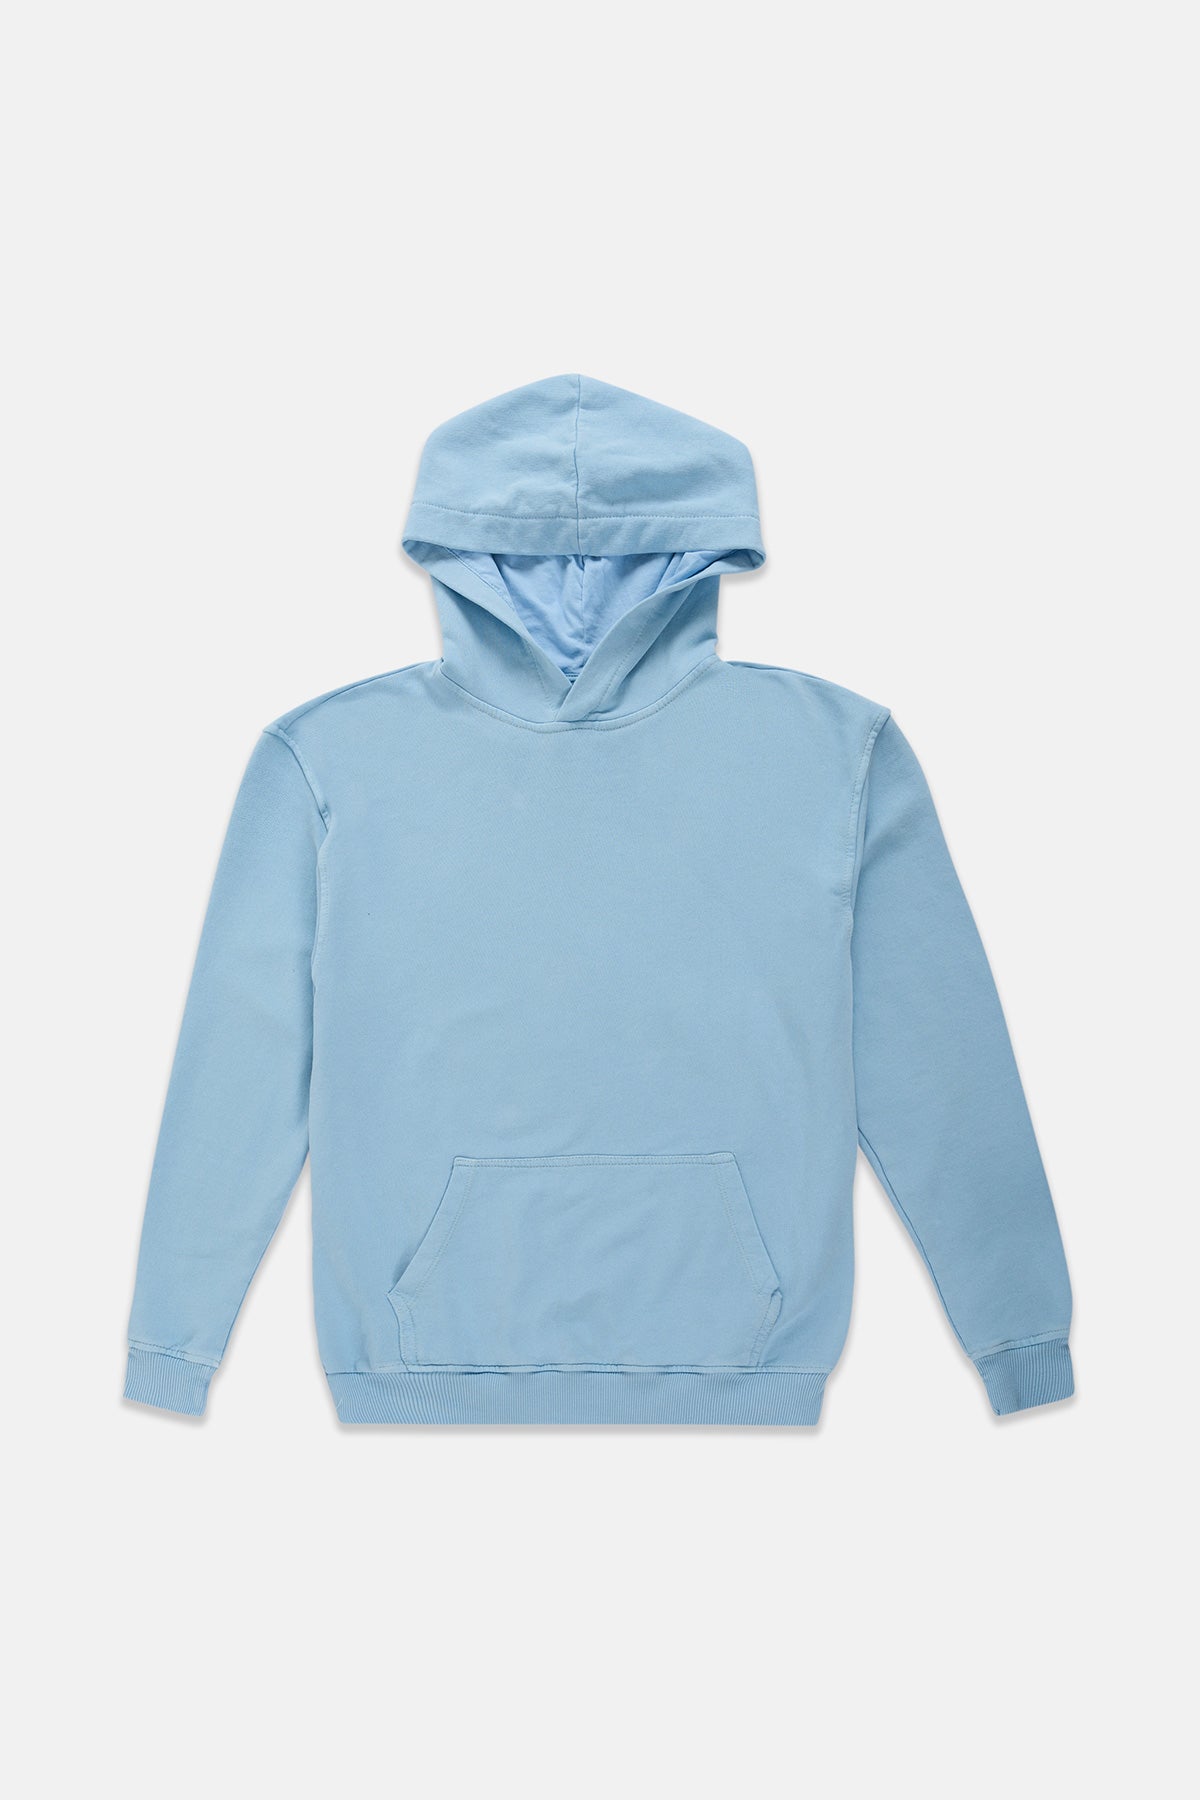 Sky French Terry Hoodie - Polonio